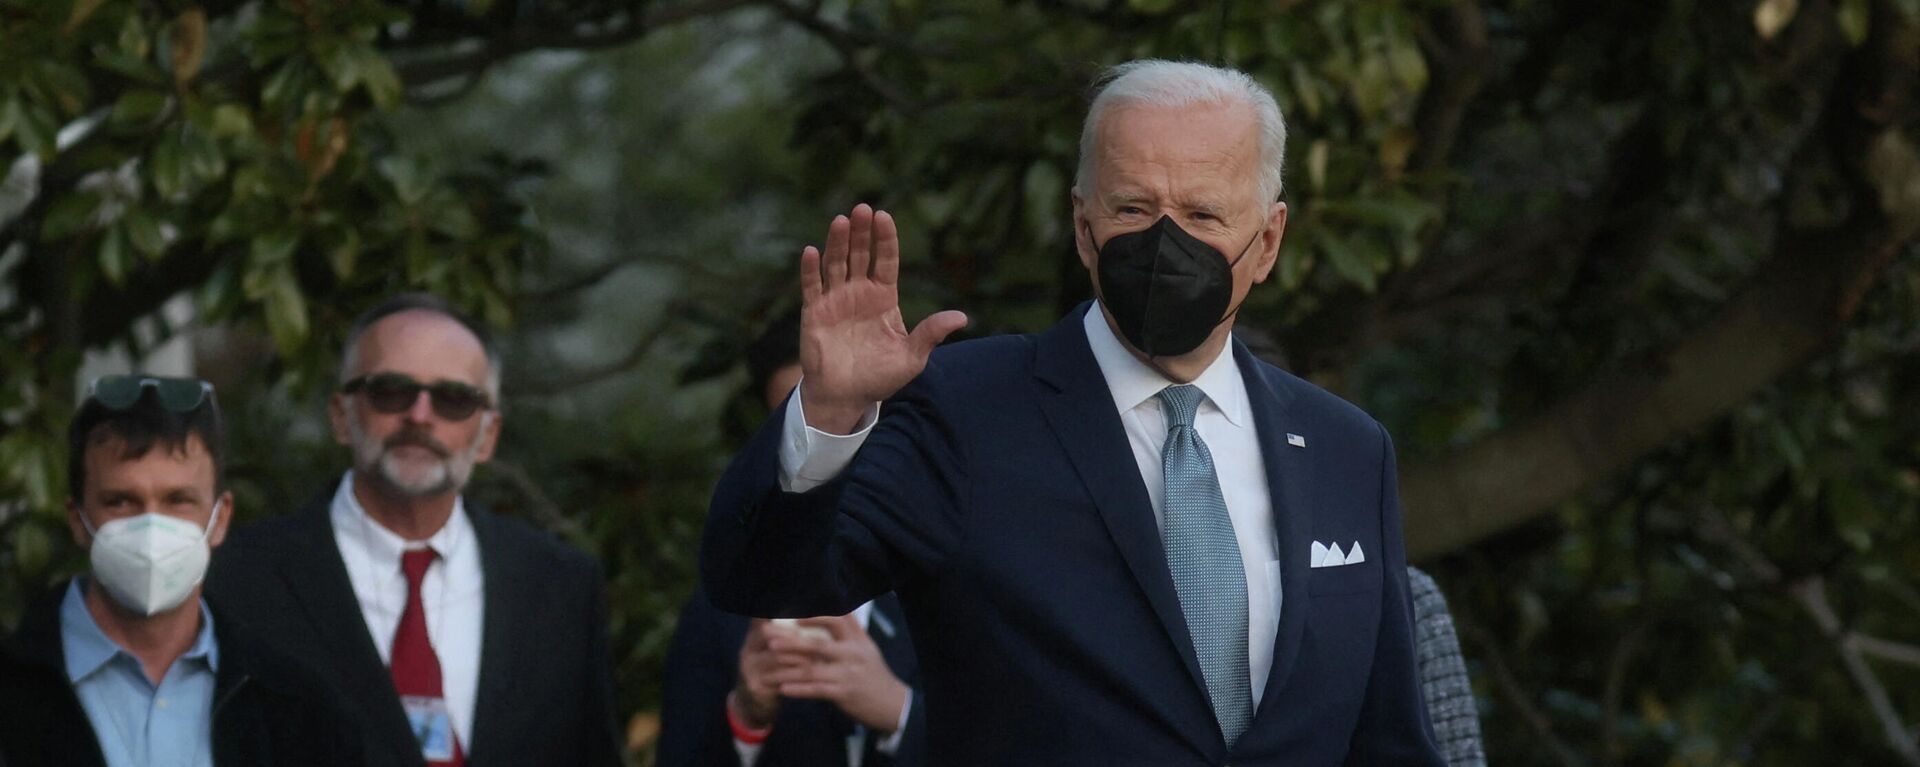 U.S. President Joe Biden waves to the media before boarding Marine One for travel to Delaware from the South Lawn of the White House in Washington, U.S., February 25, 2022. - Sputnik International, 1920, 28.02.2022